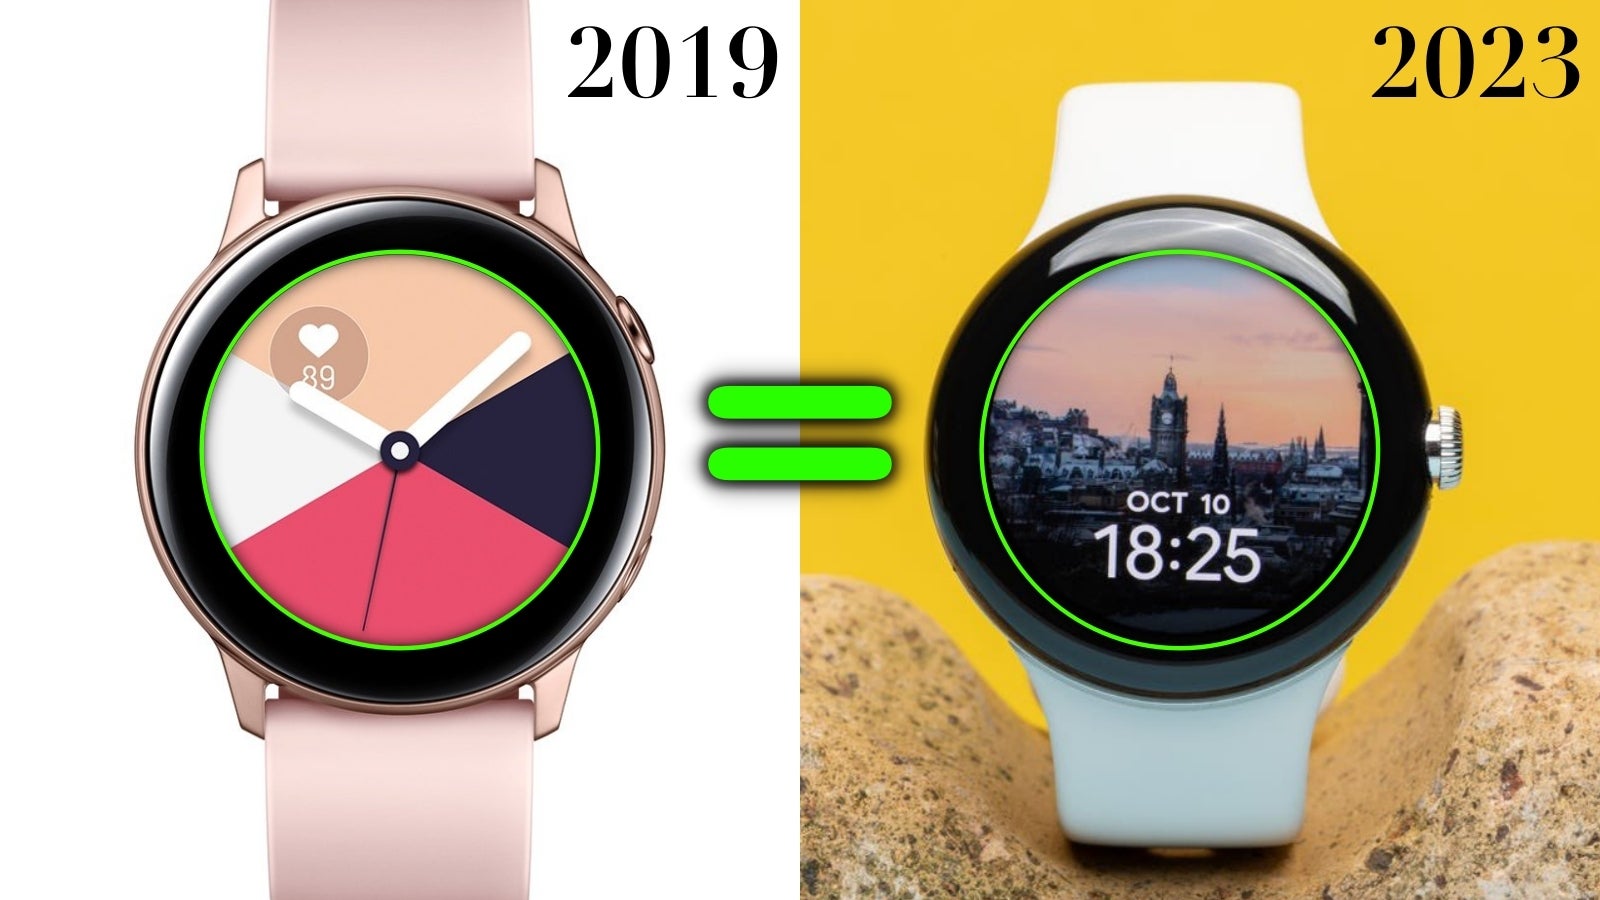 My 2023 Pixel Watch 2 has the same bezel size as the 2019 Galaxy Watch Active, and that’s… not cool. - Pixel Watch 3: Google wants me to “transition” into the (smartwatch) person I refuse to be!